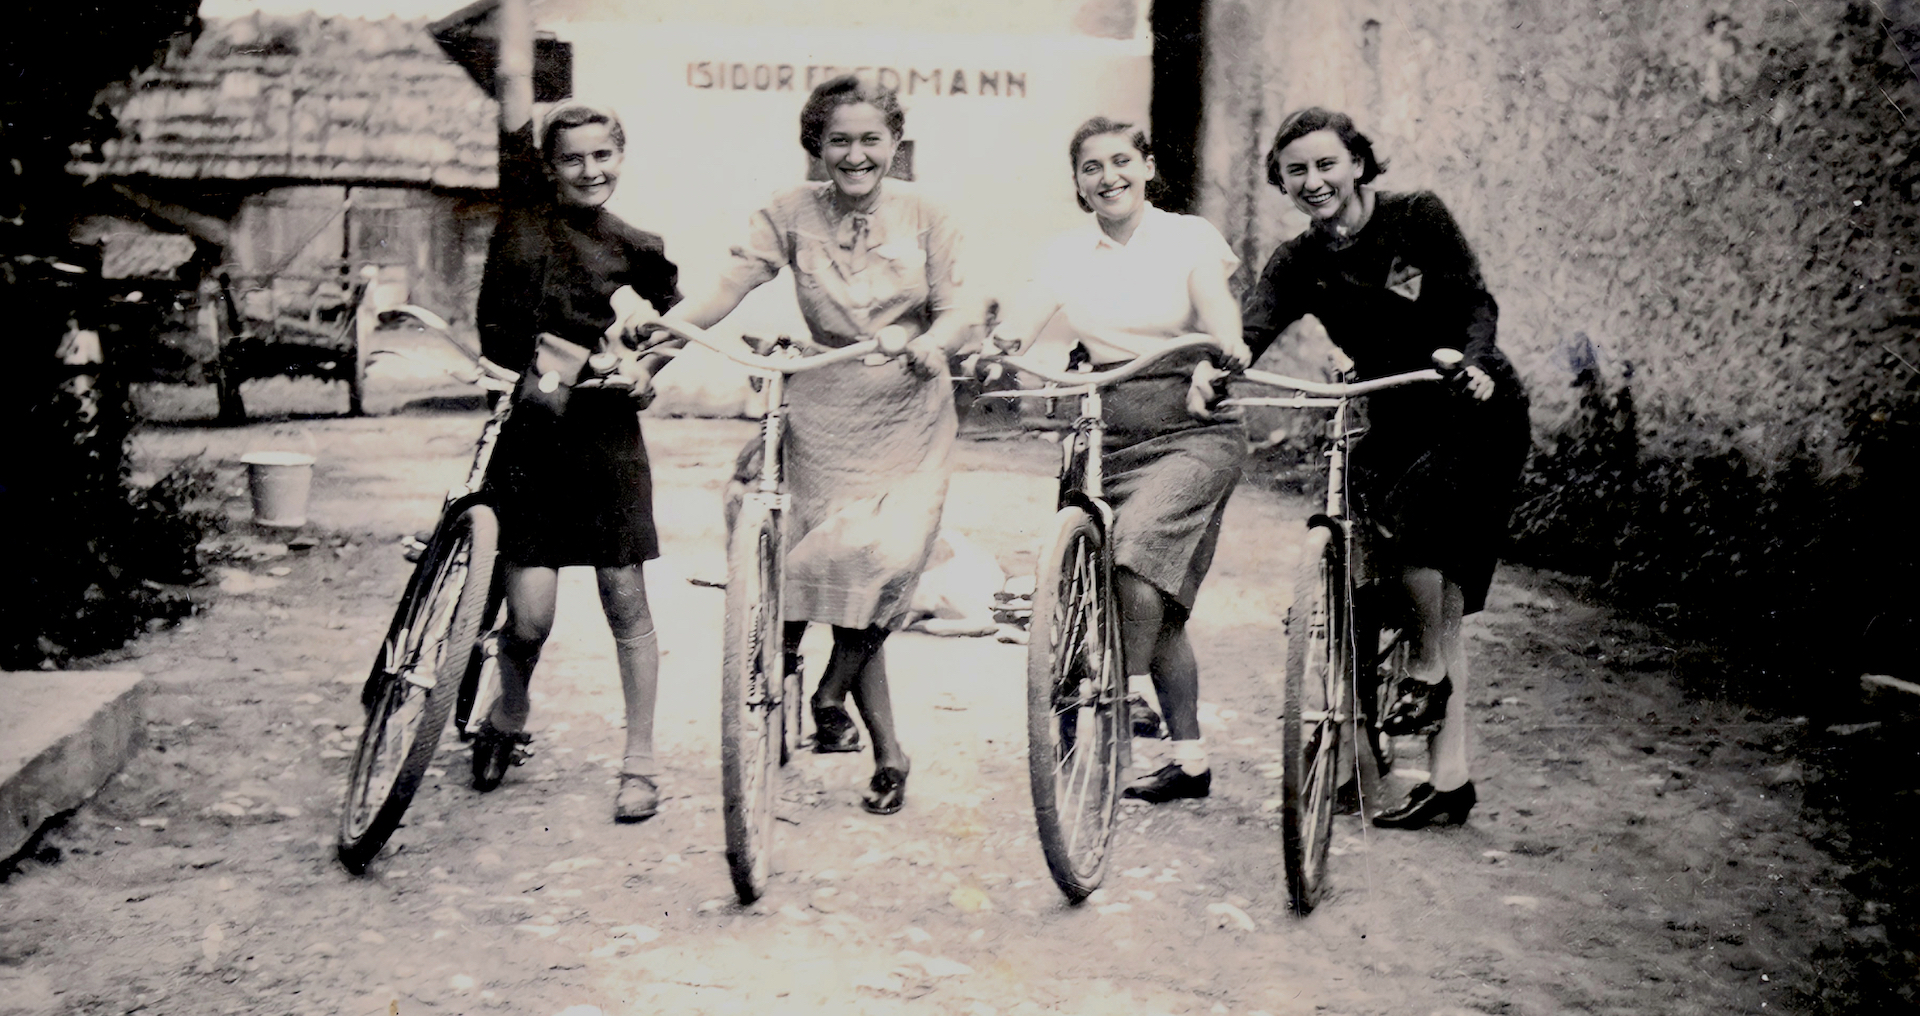 An old black and white photo shows four women on bikes, smiling happily and posing for the camera. They appear to be on a street in a town.